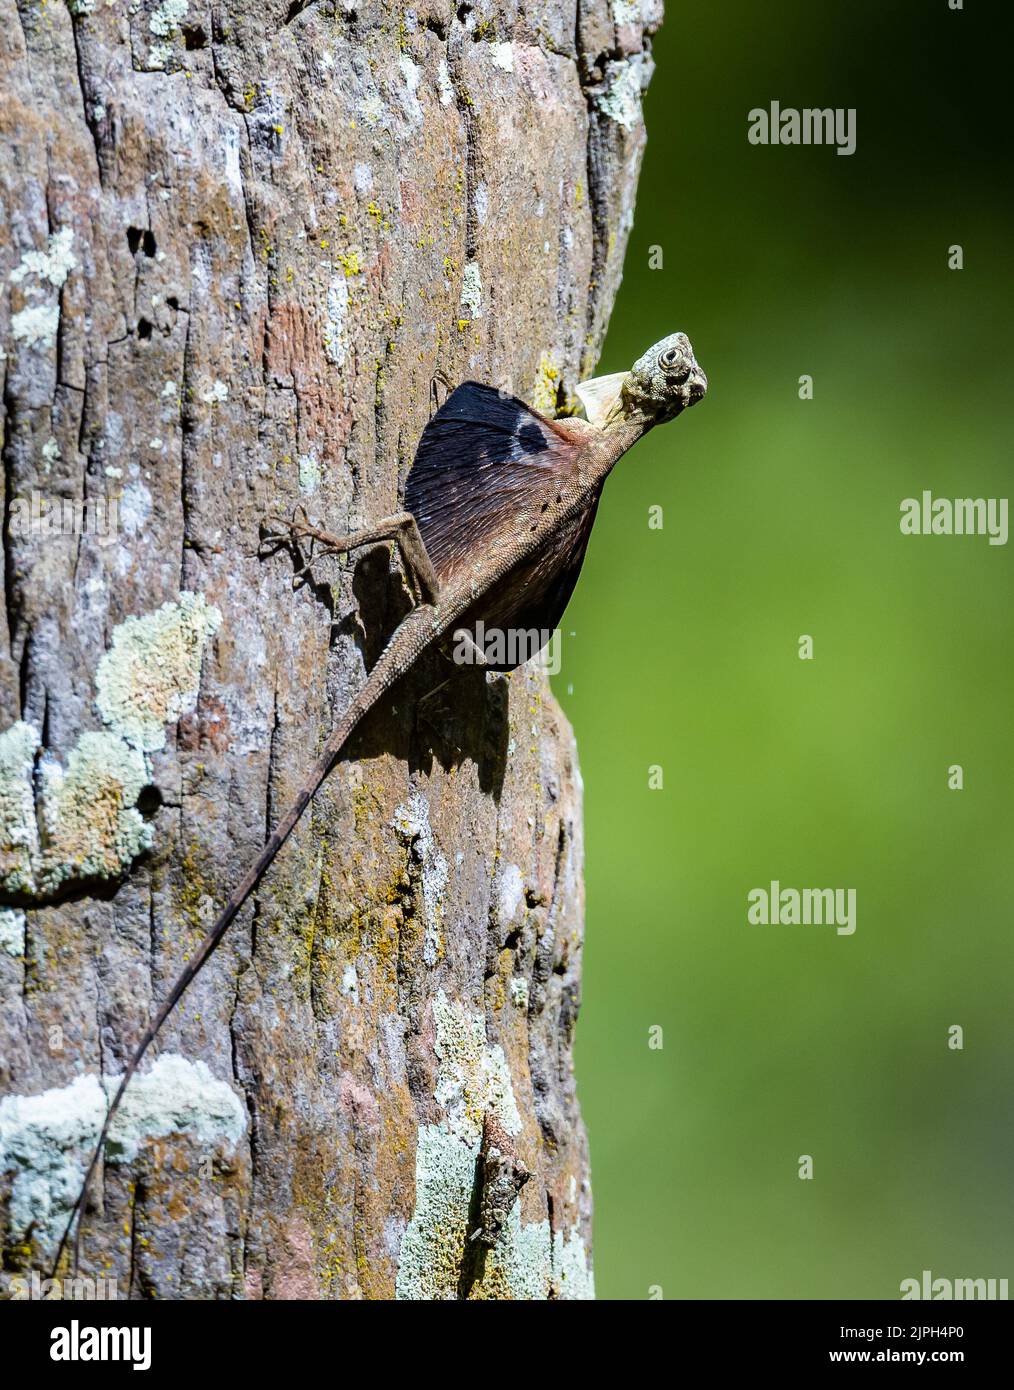 A Gliding Lizard (Draco sp.) on a tree trunk. Makassar, South Sulawesi, Indonesia. Stock Photo